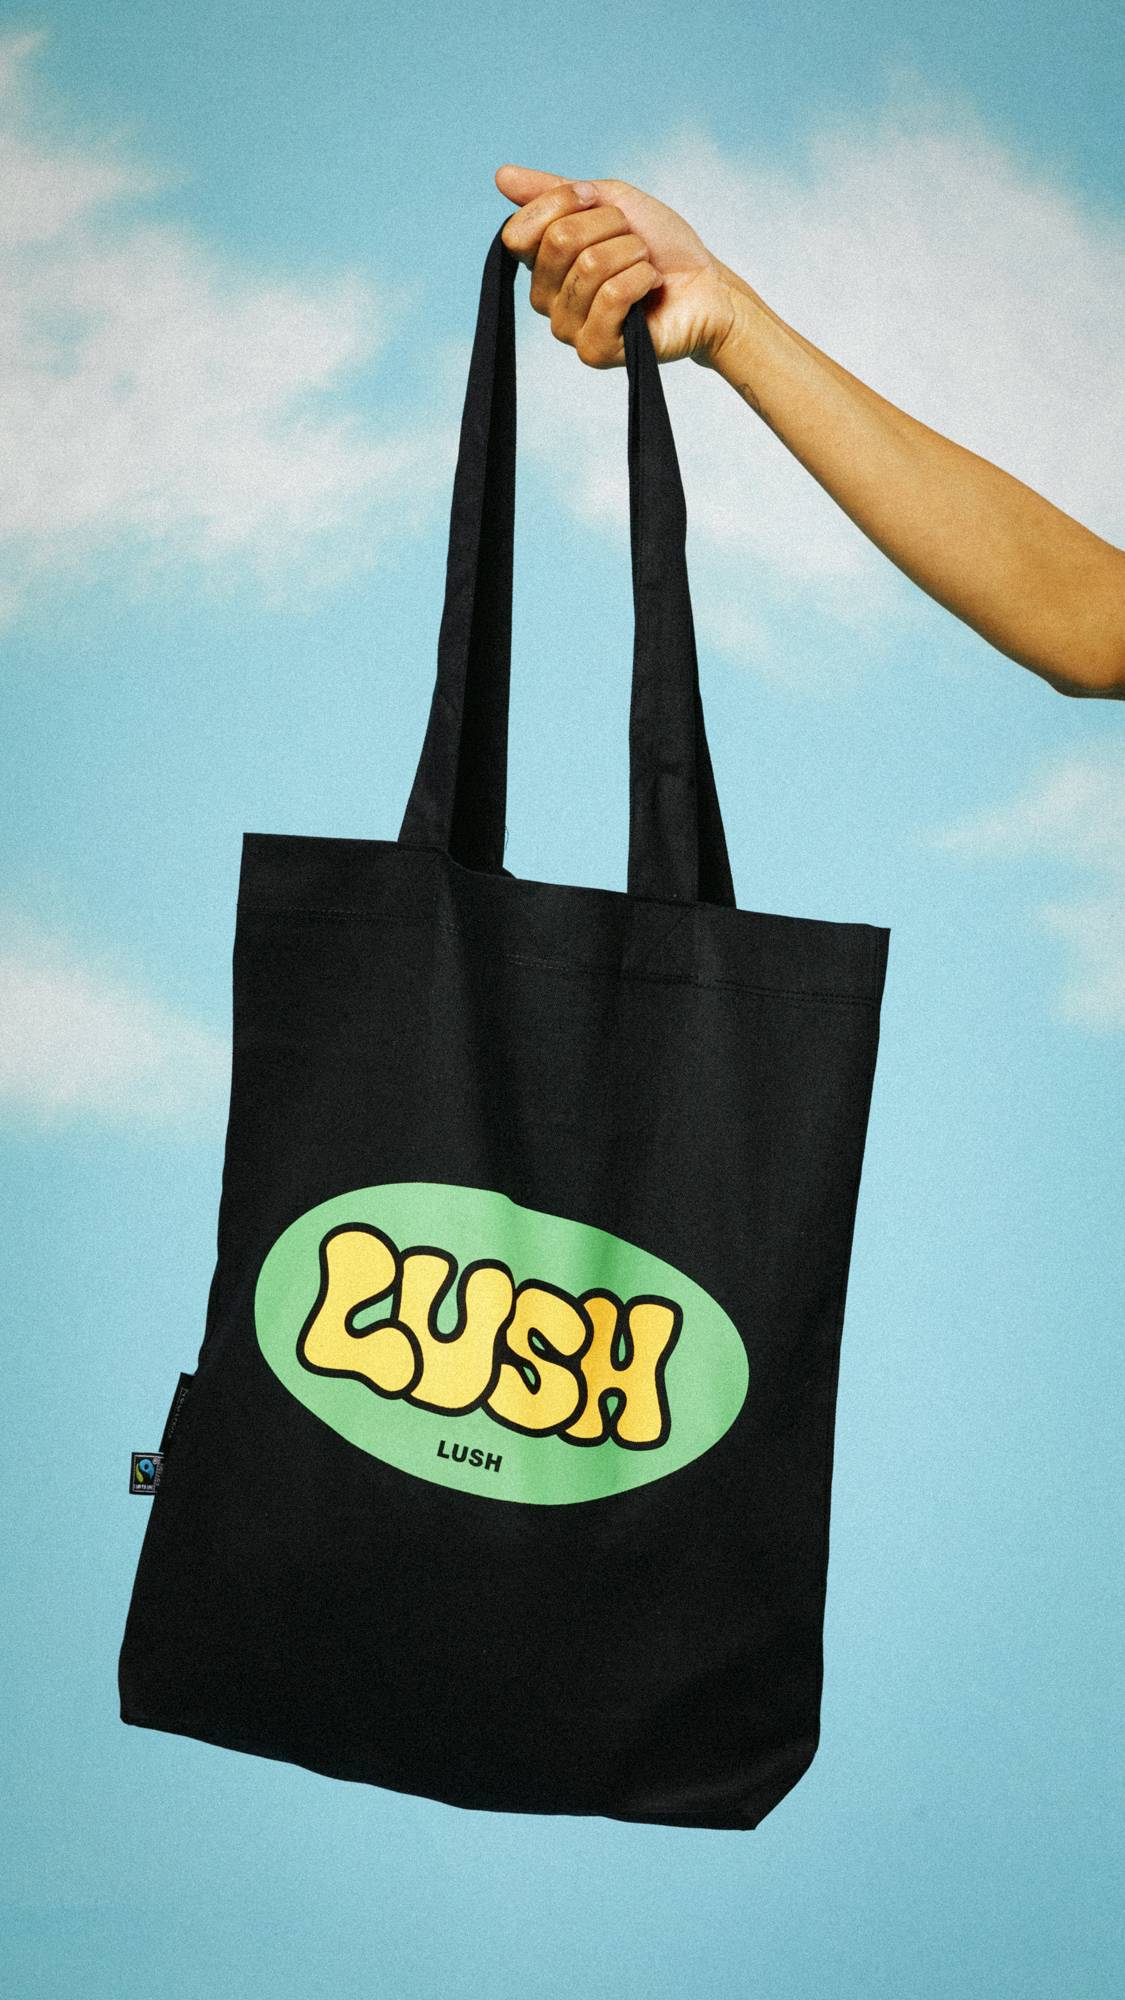 Image shows the model holding the Retro Bubble tote bag by the strings in the air on a blue sky background with clouds. 